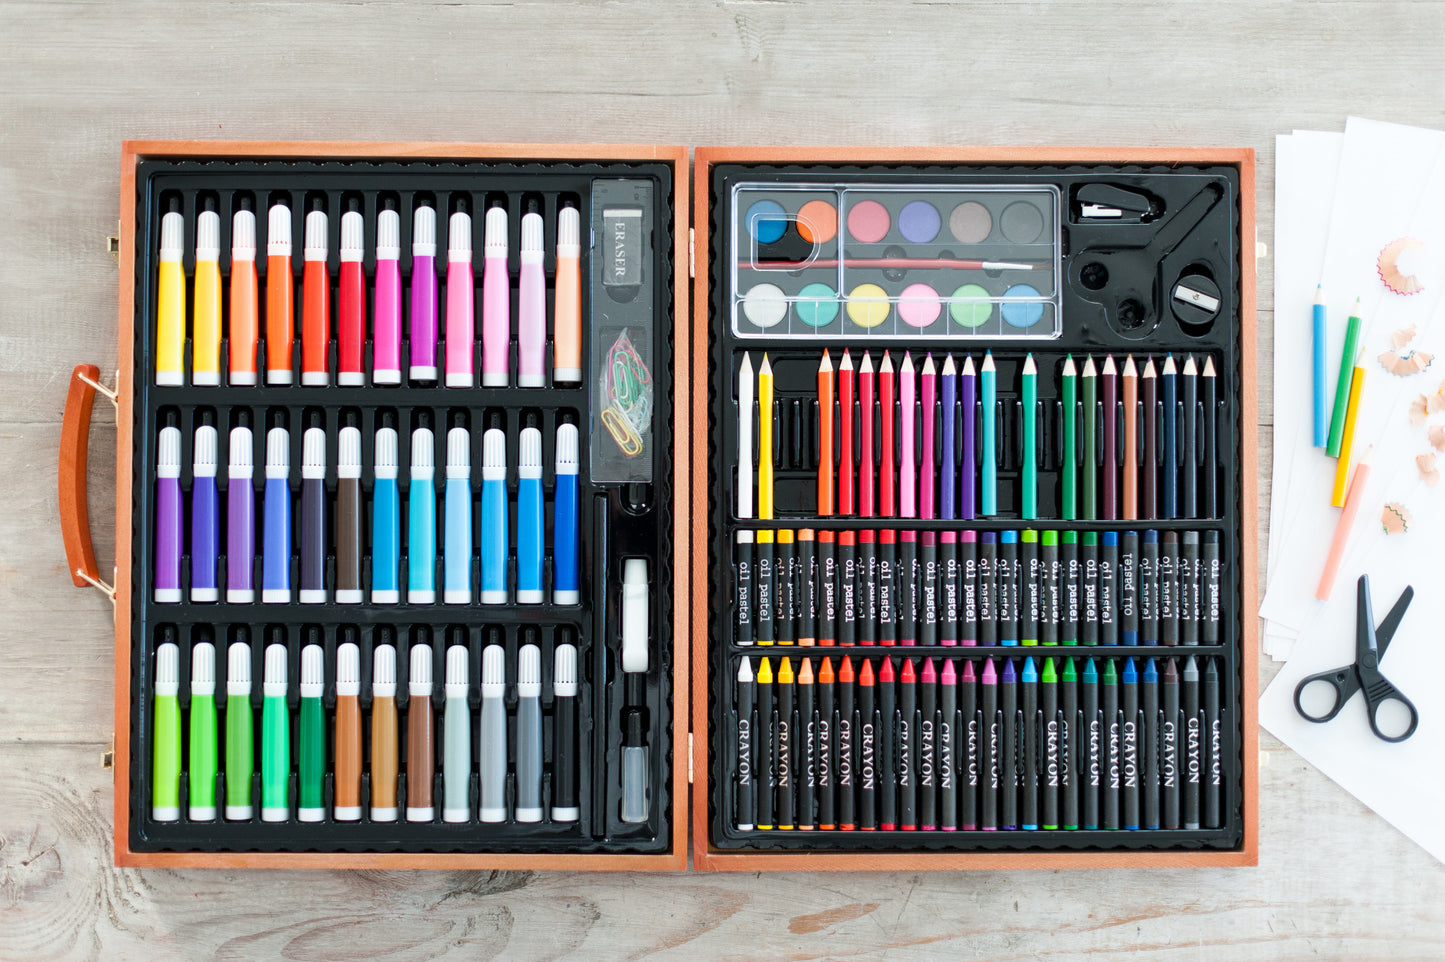 Personalized Art Kit, Play Create Learn Imagine